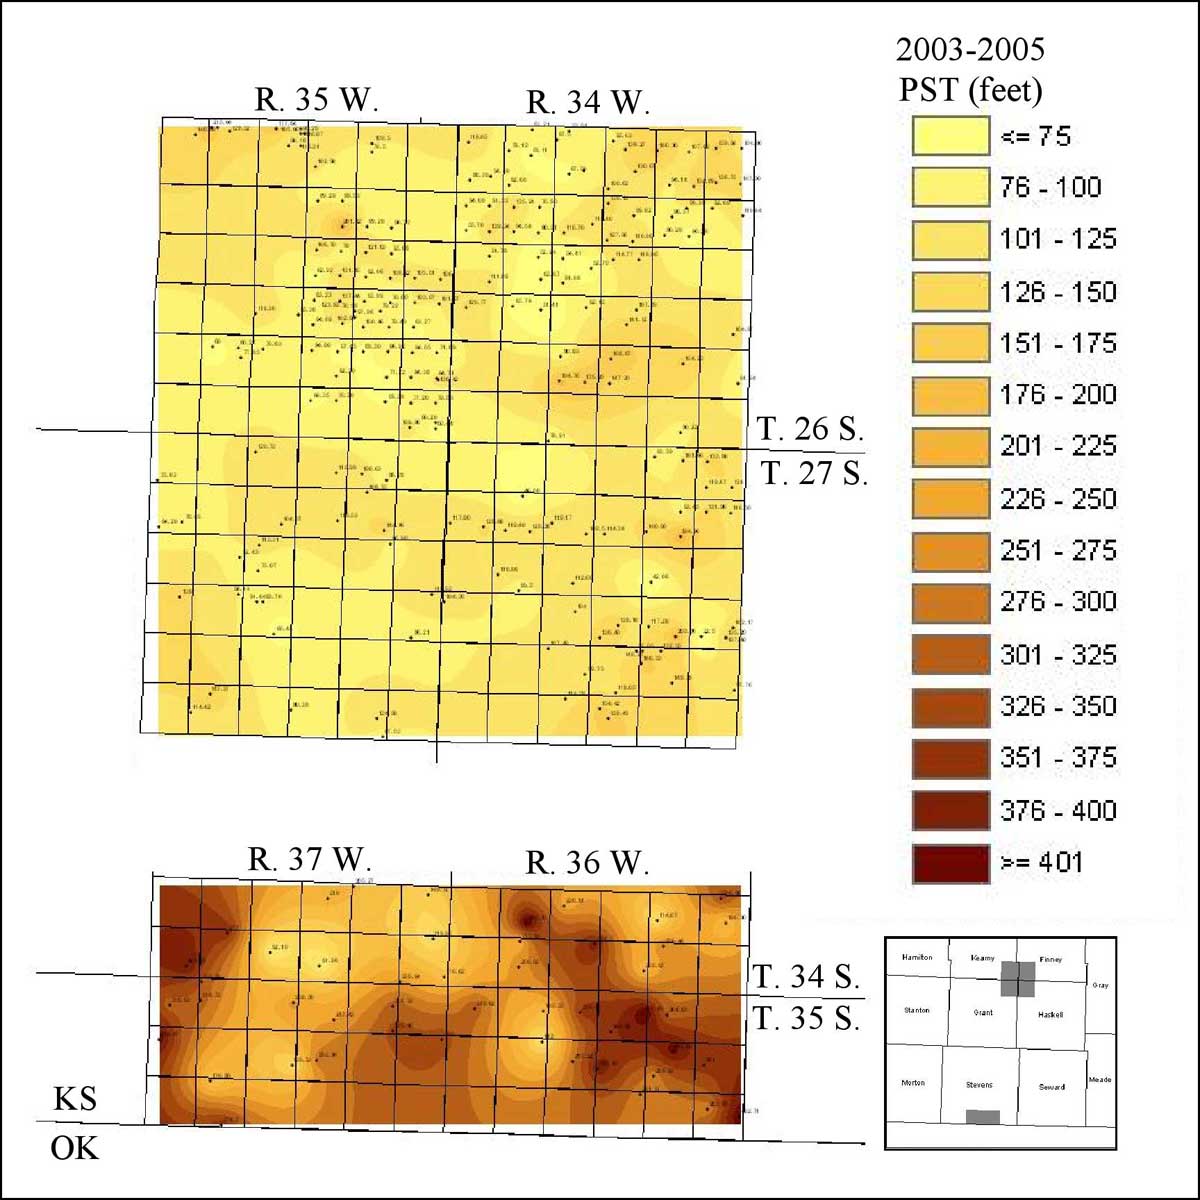 2003-2005 Practical saturated thickness is mostly less than 100 feet in Four Corners; similar to predevelopment in SE Stevens, perhaps less of the thickest color.